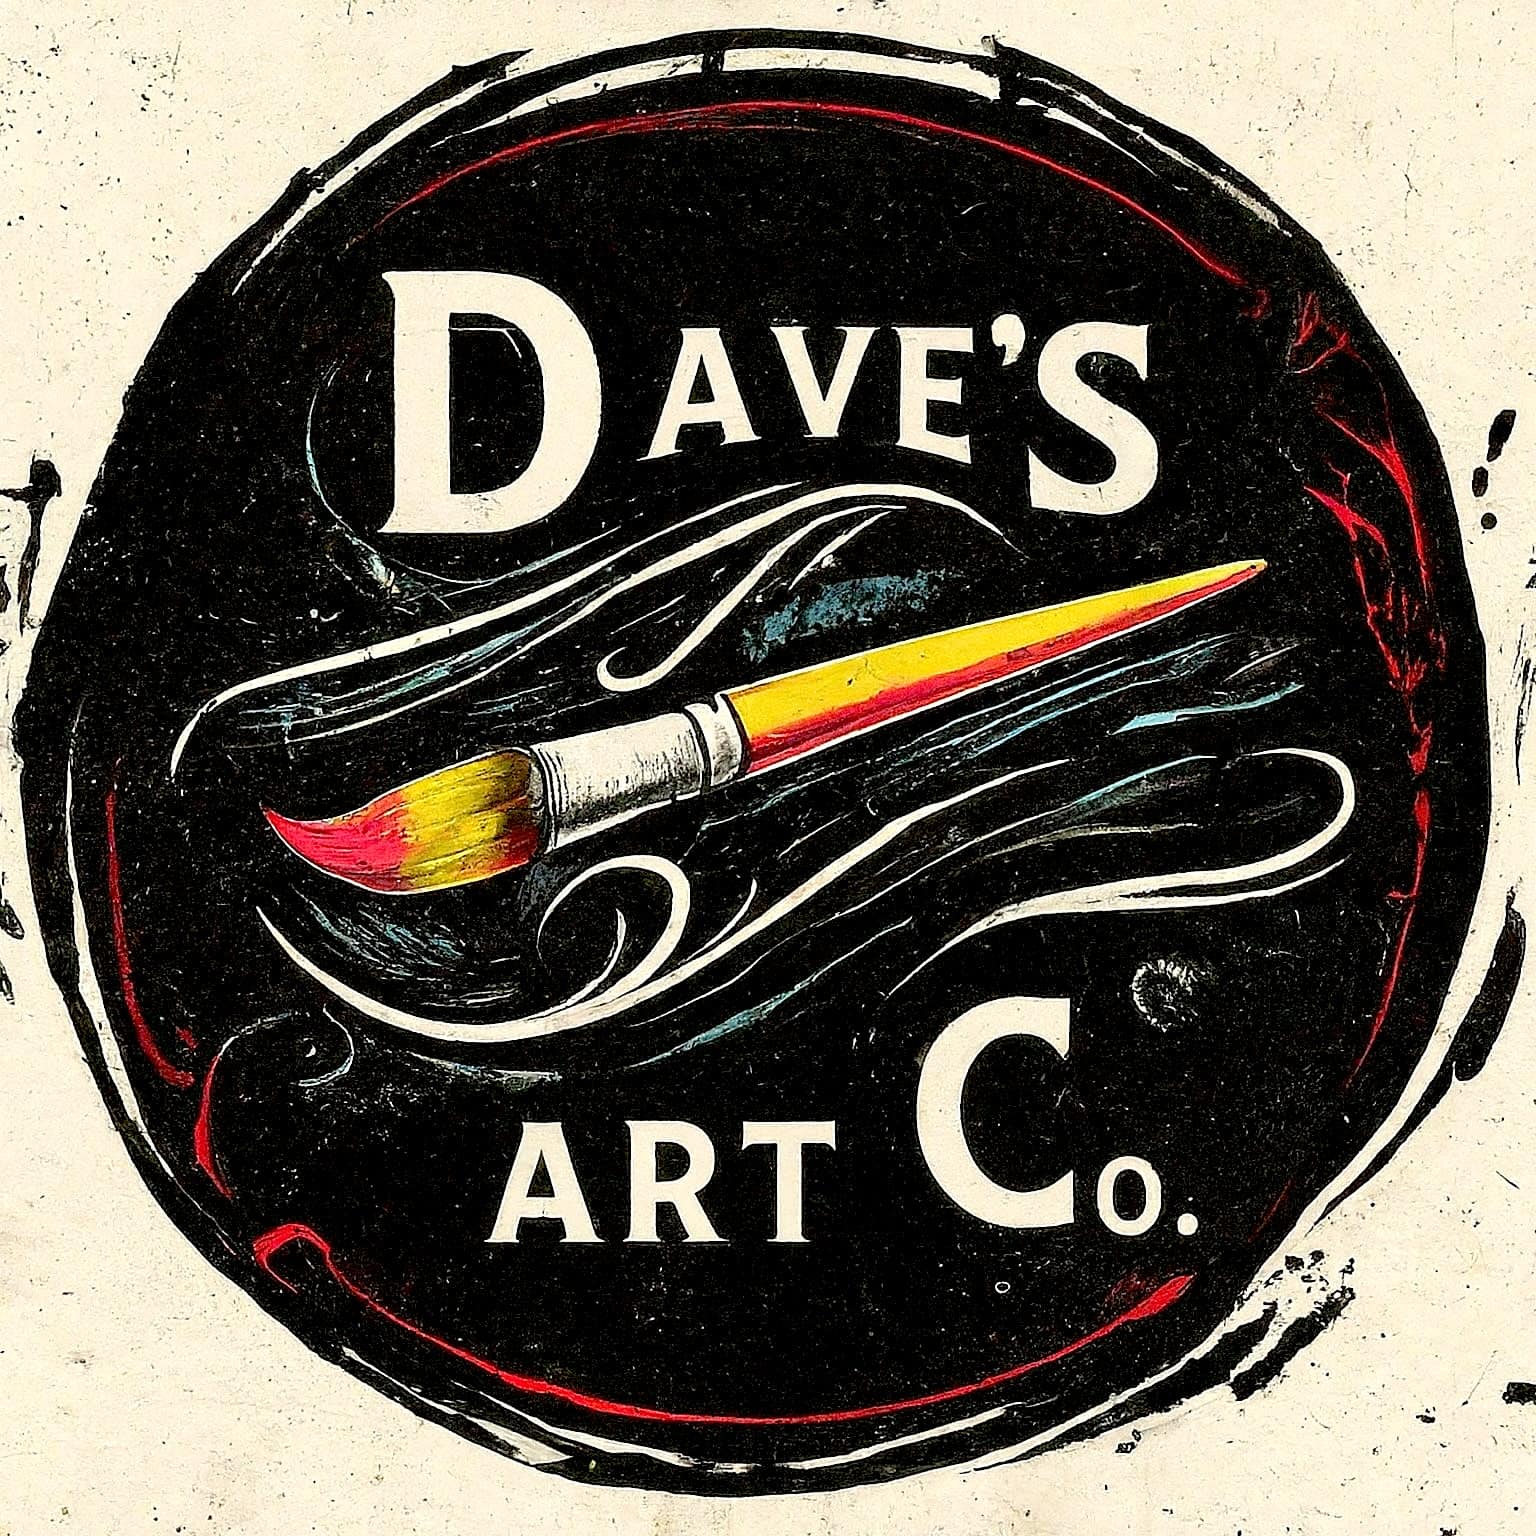 Dave's Art Co